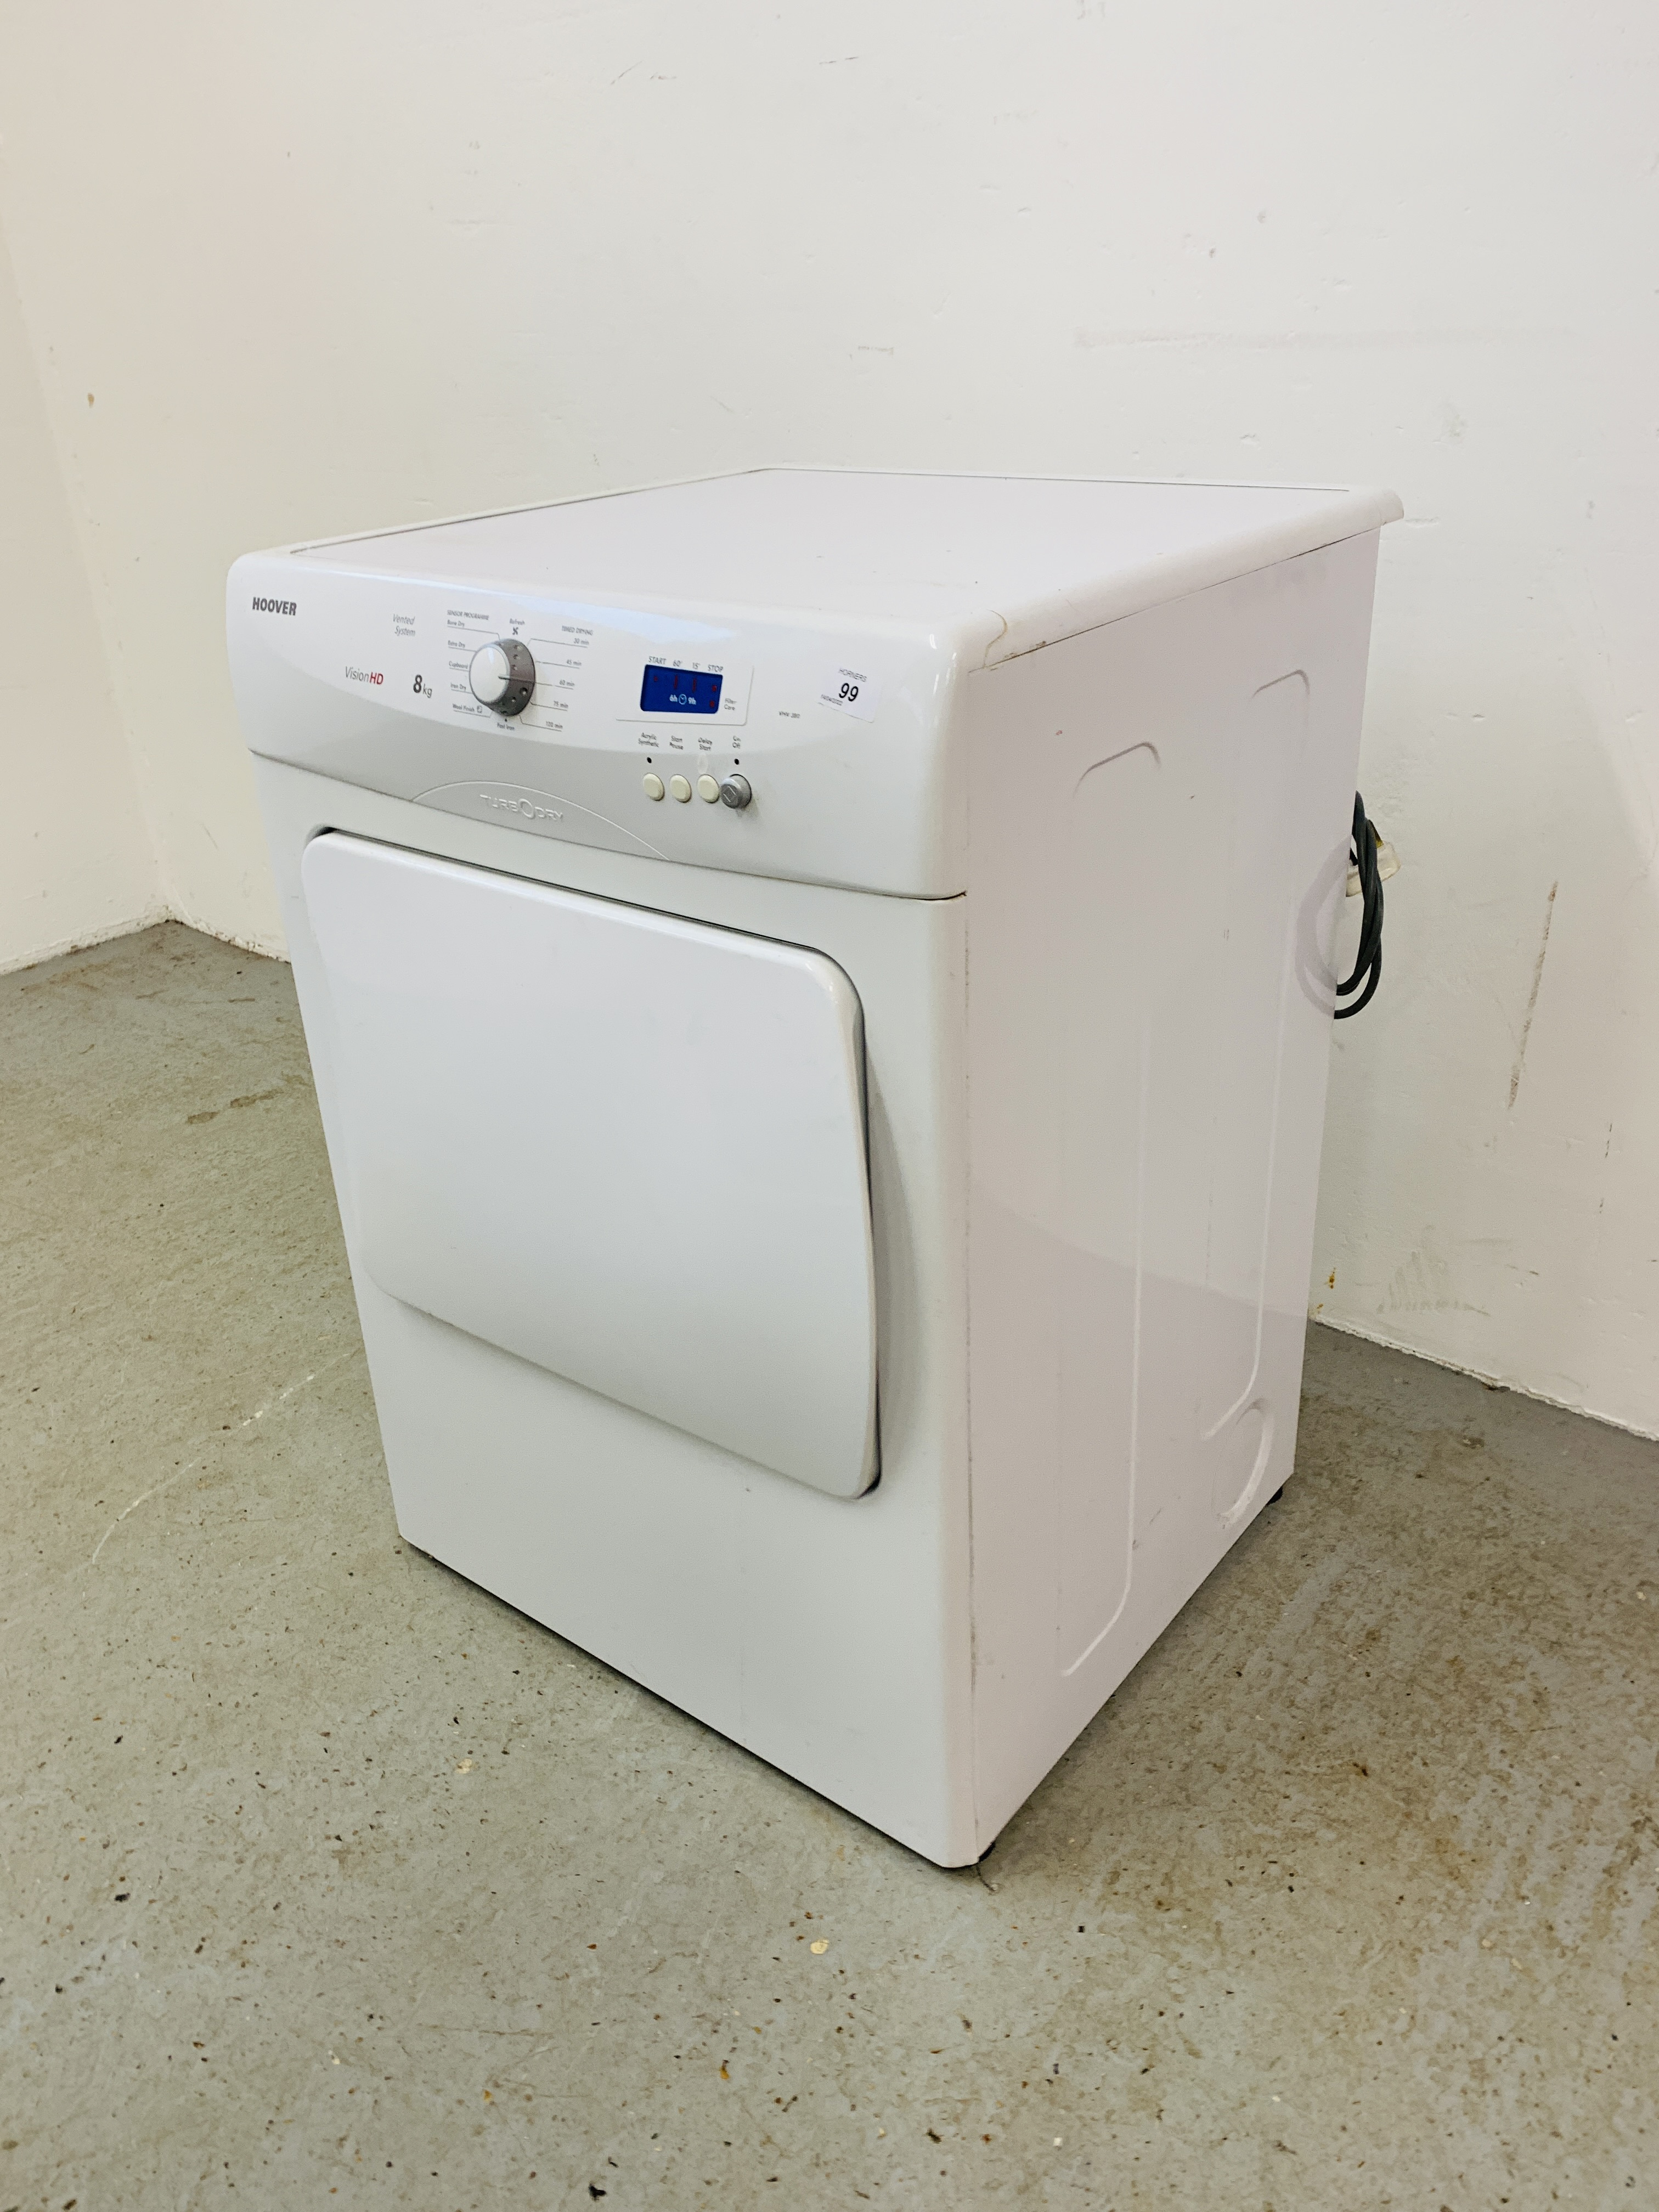 A HOOVER VISION HD 8 KG TUMBLE DRYER - SOLD AS SEEN. - Image 2 of 6